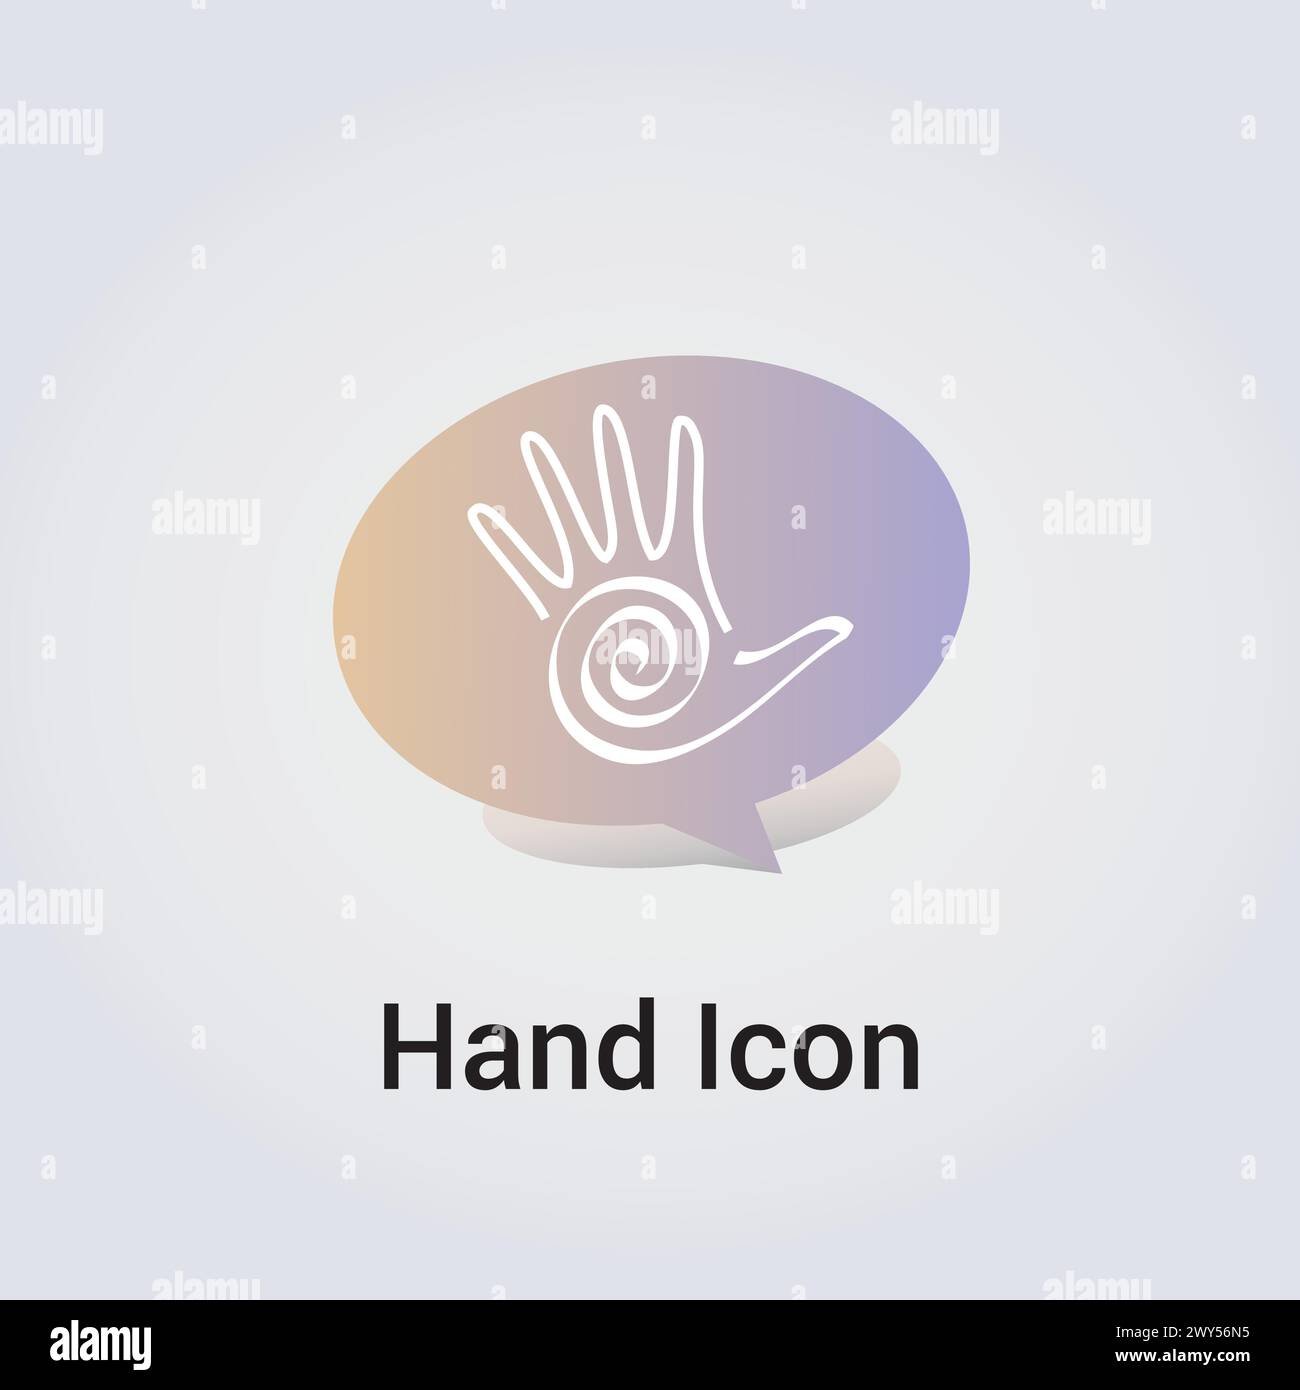 Hand and Dialog Box Icon, Spiral Hand Silhouette Logo Decorative Element Pastel Light Colors Stock Vector